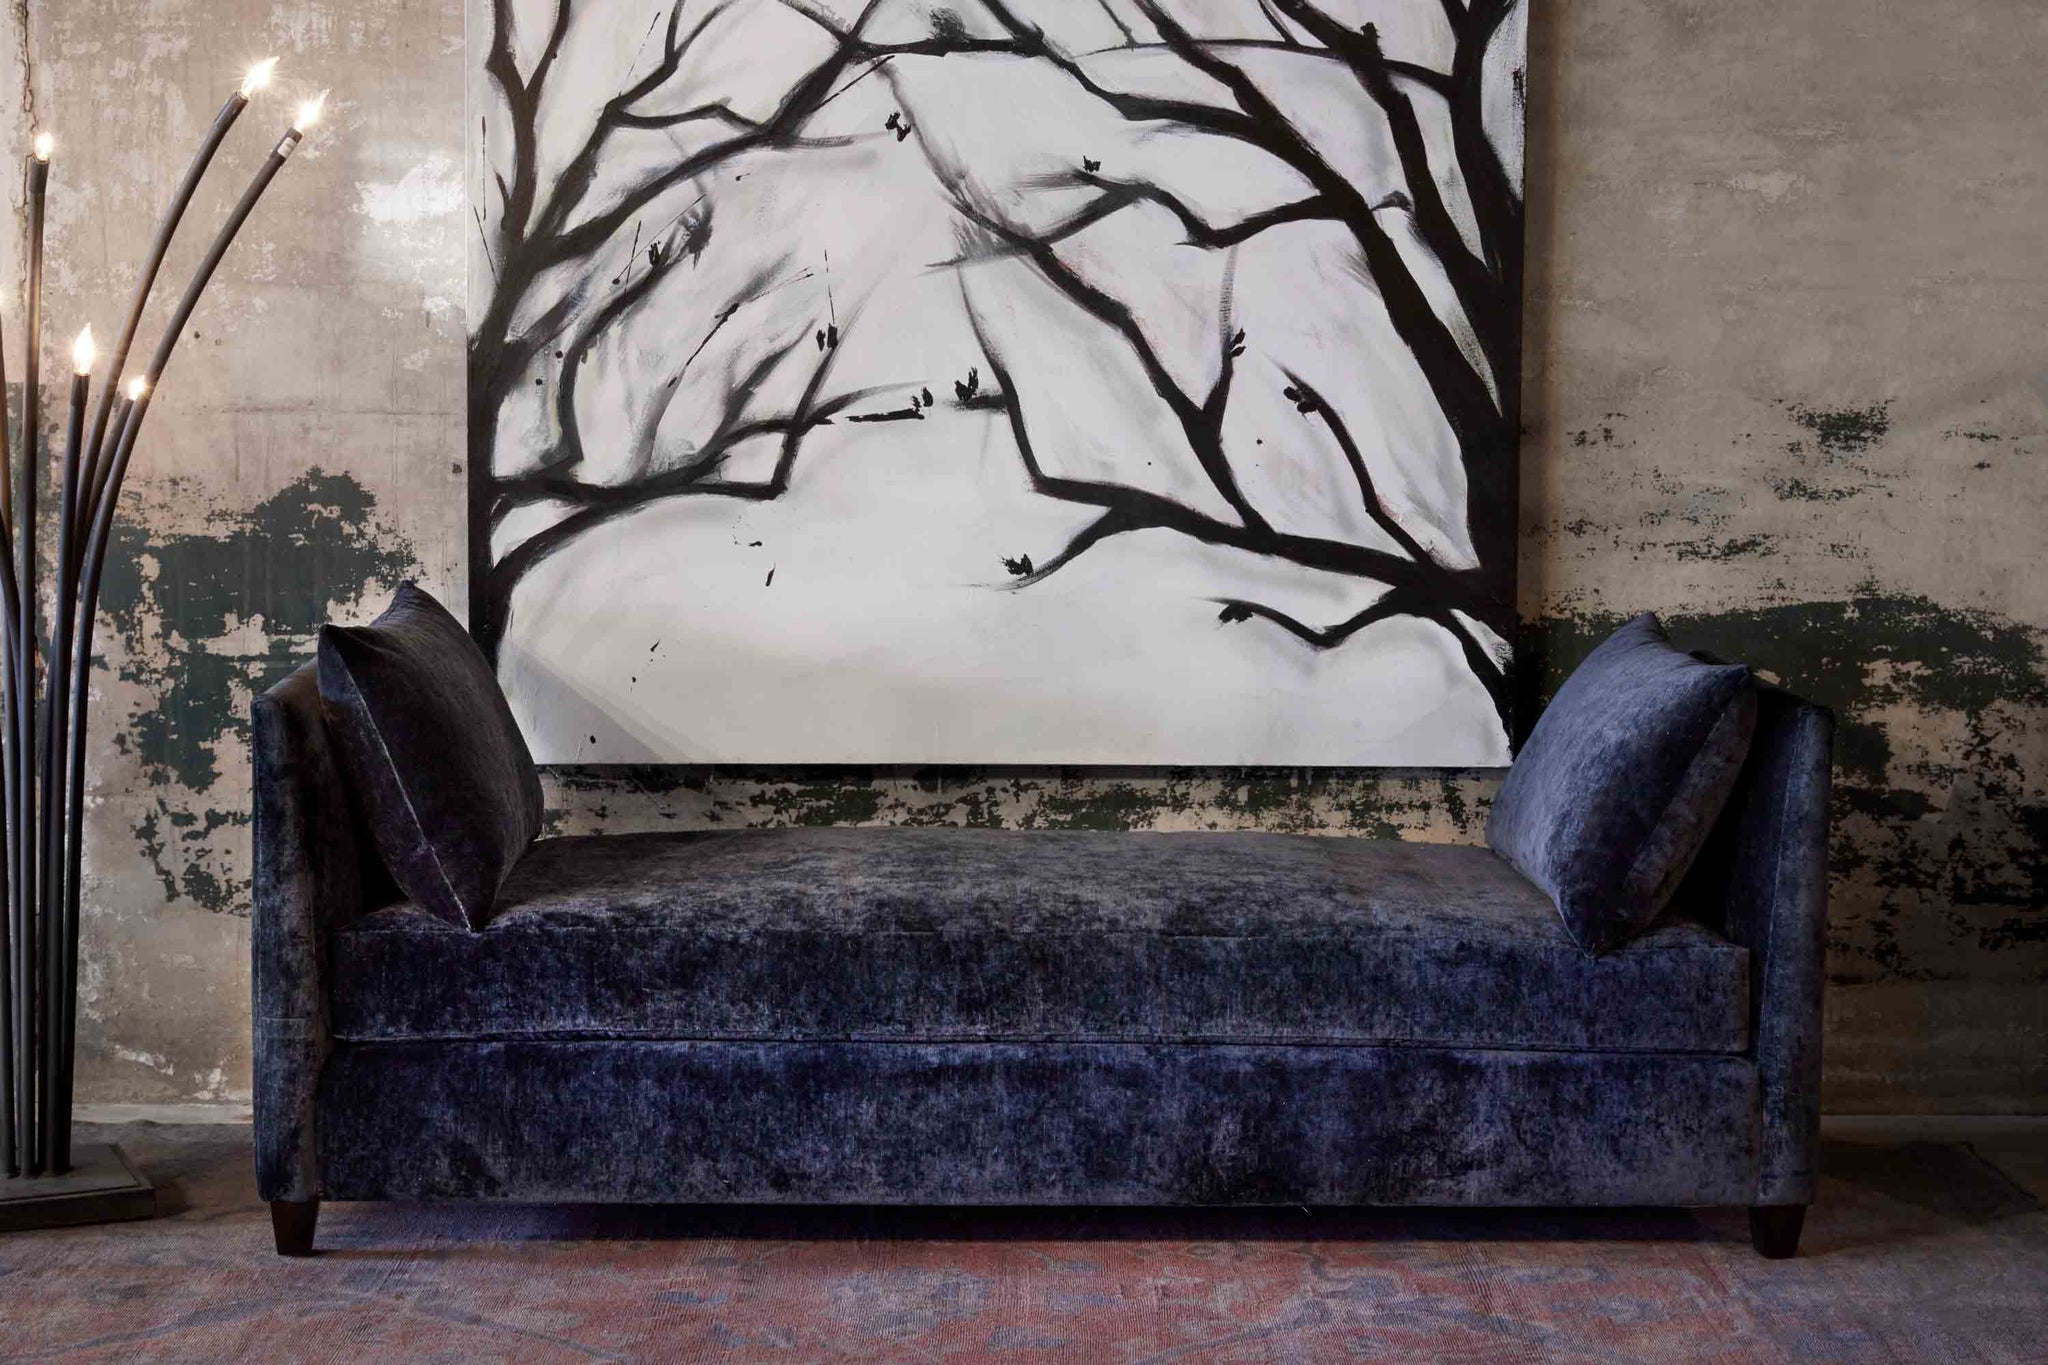  Upholstered daybed in dark blue fabric with ramo floor lamp next to it. Placed against distressed brick wall. 